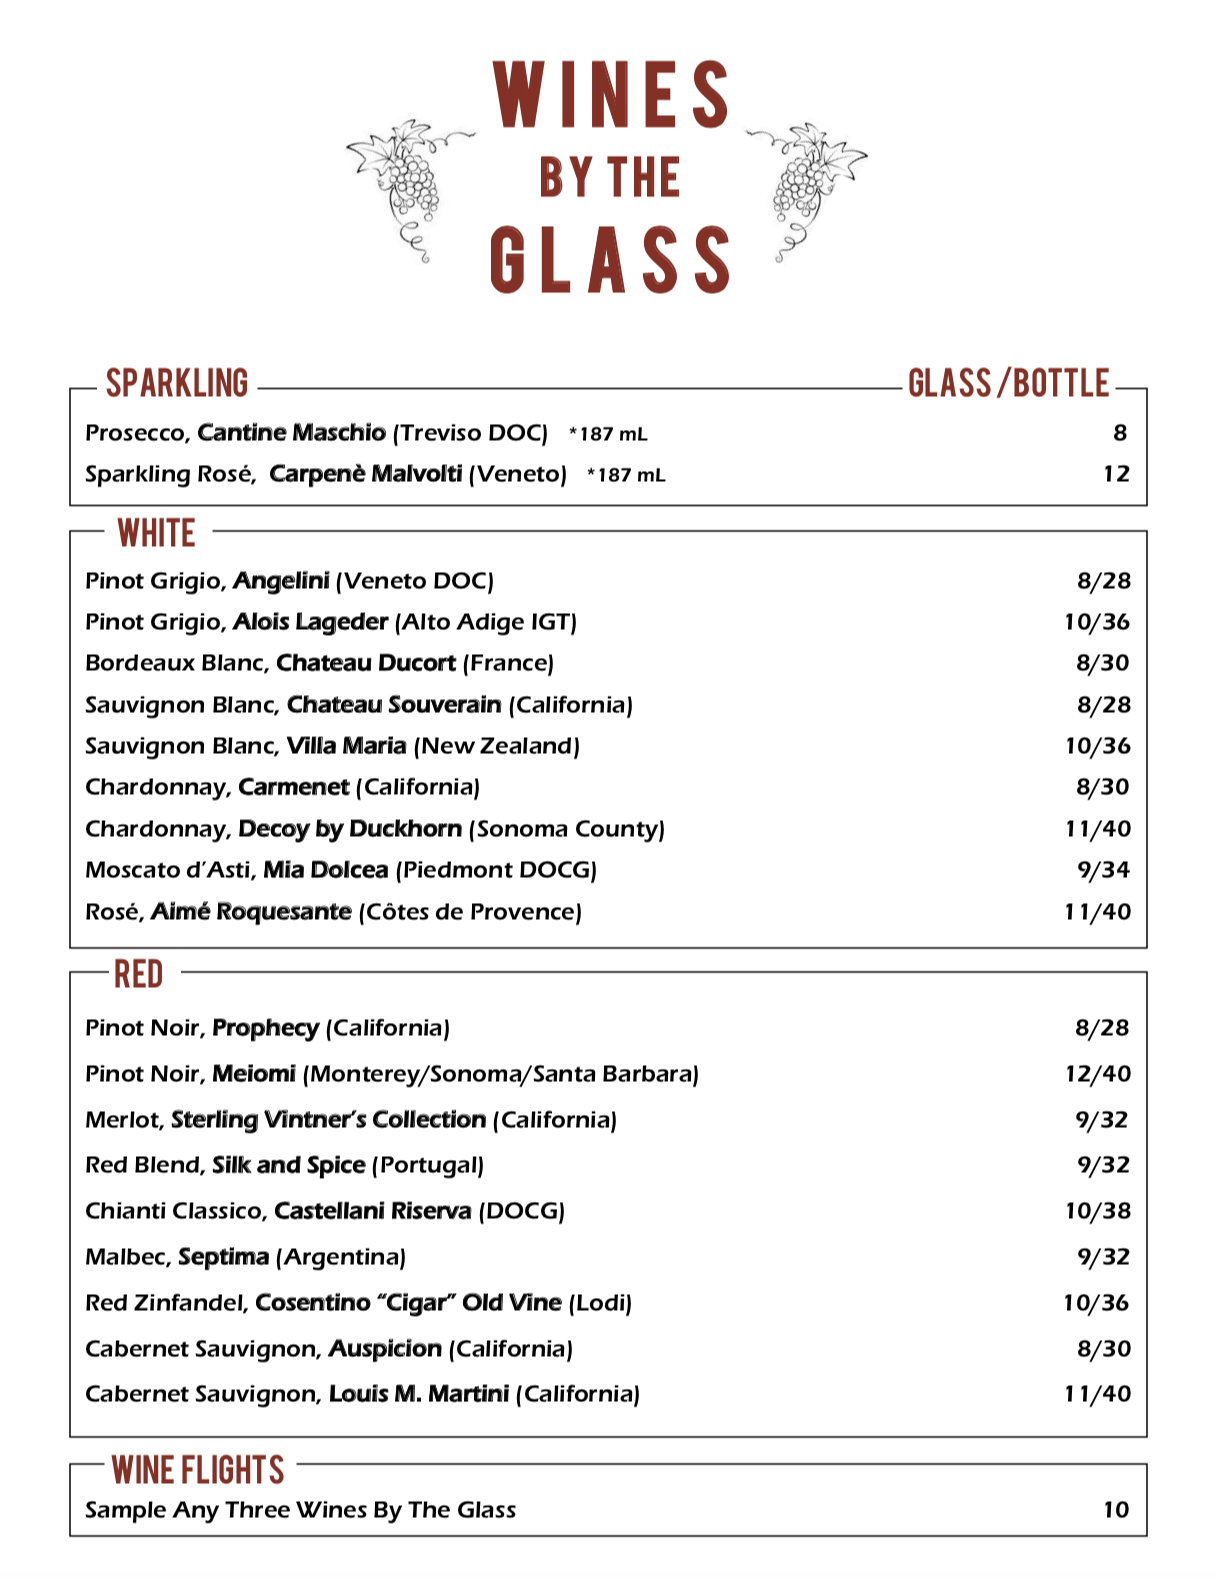 Wines by the glass